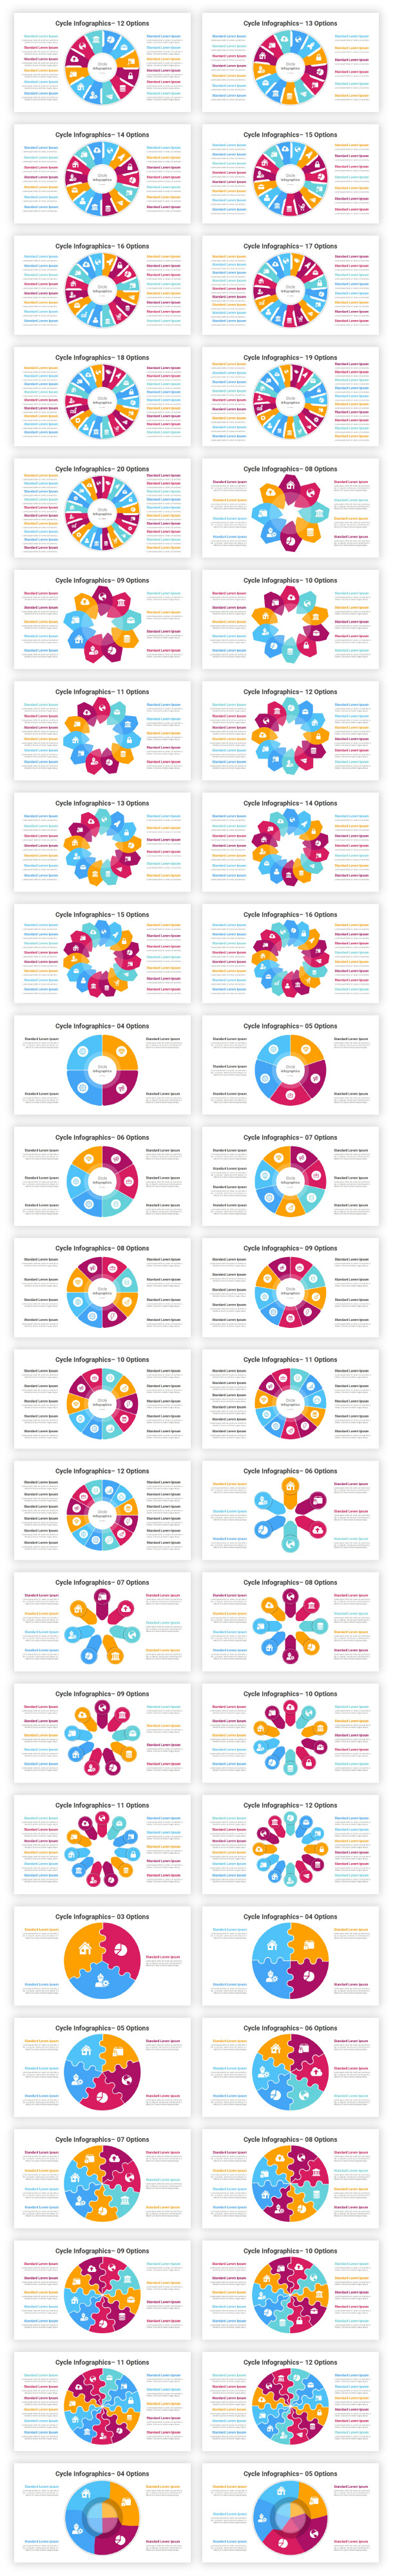 Cycle Infographics PowerPoint Diagrams Template - 2